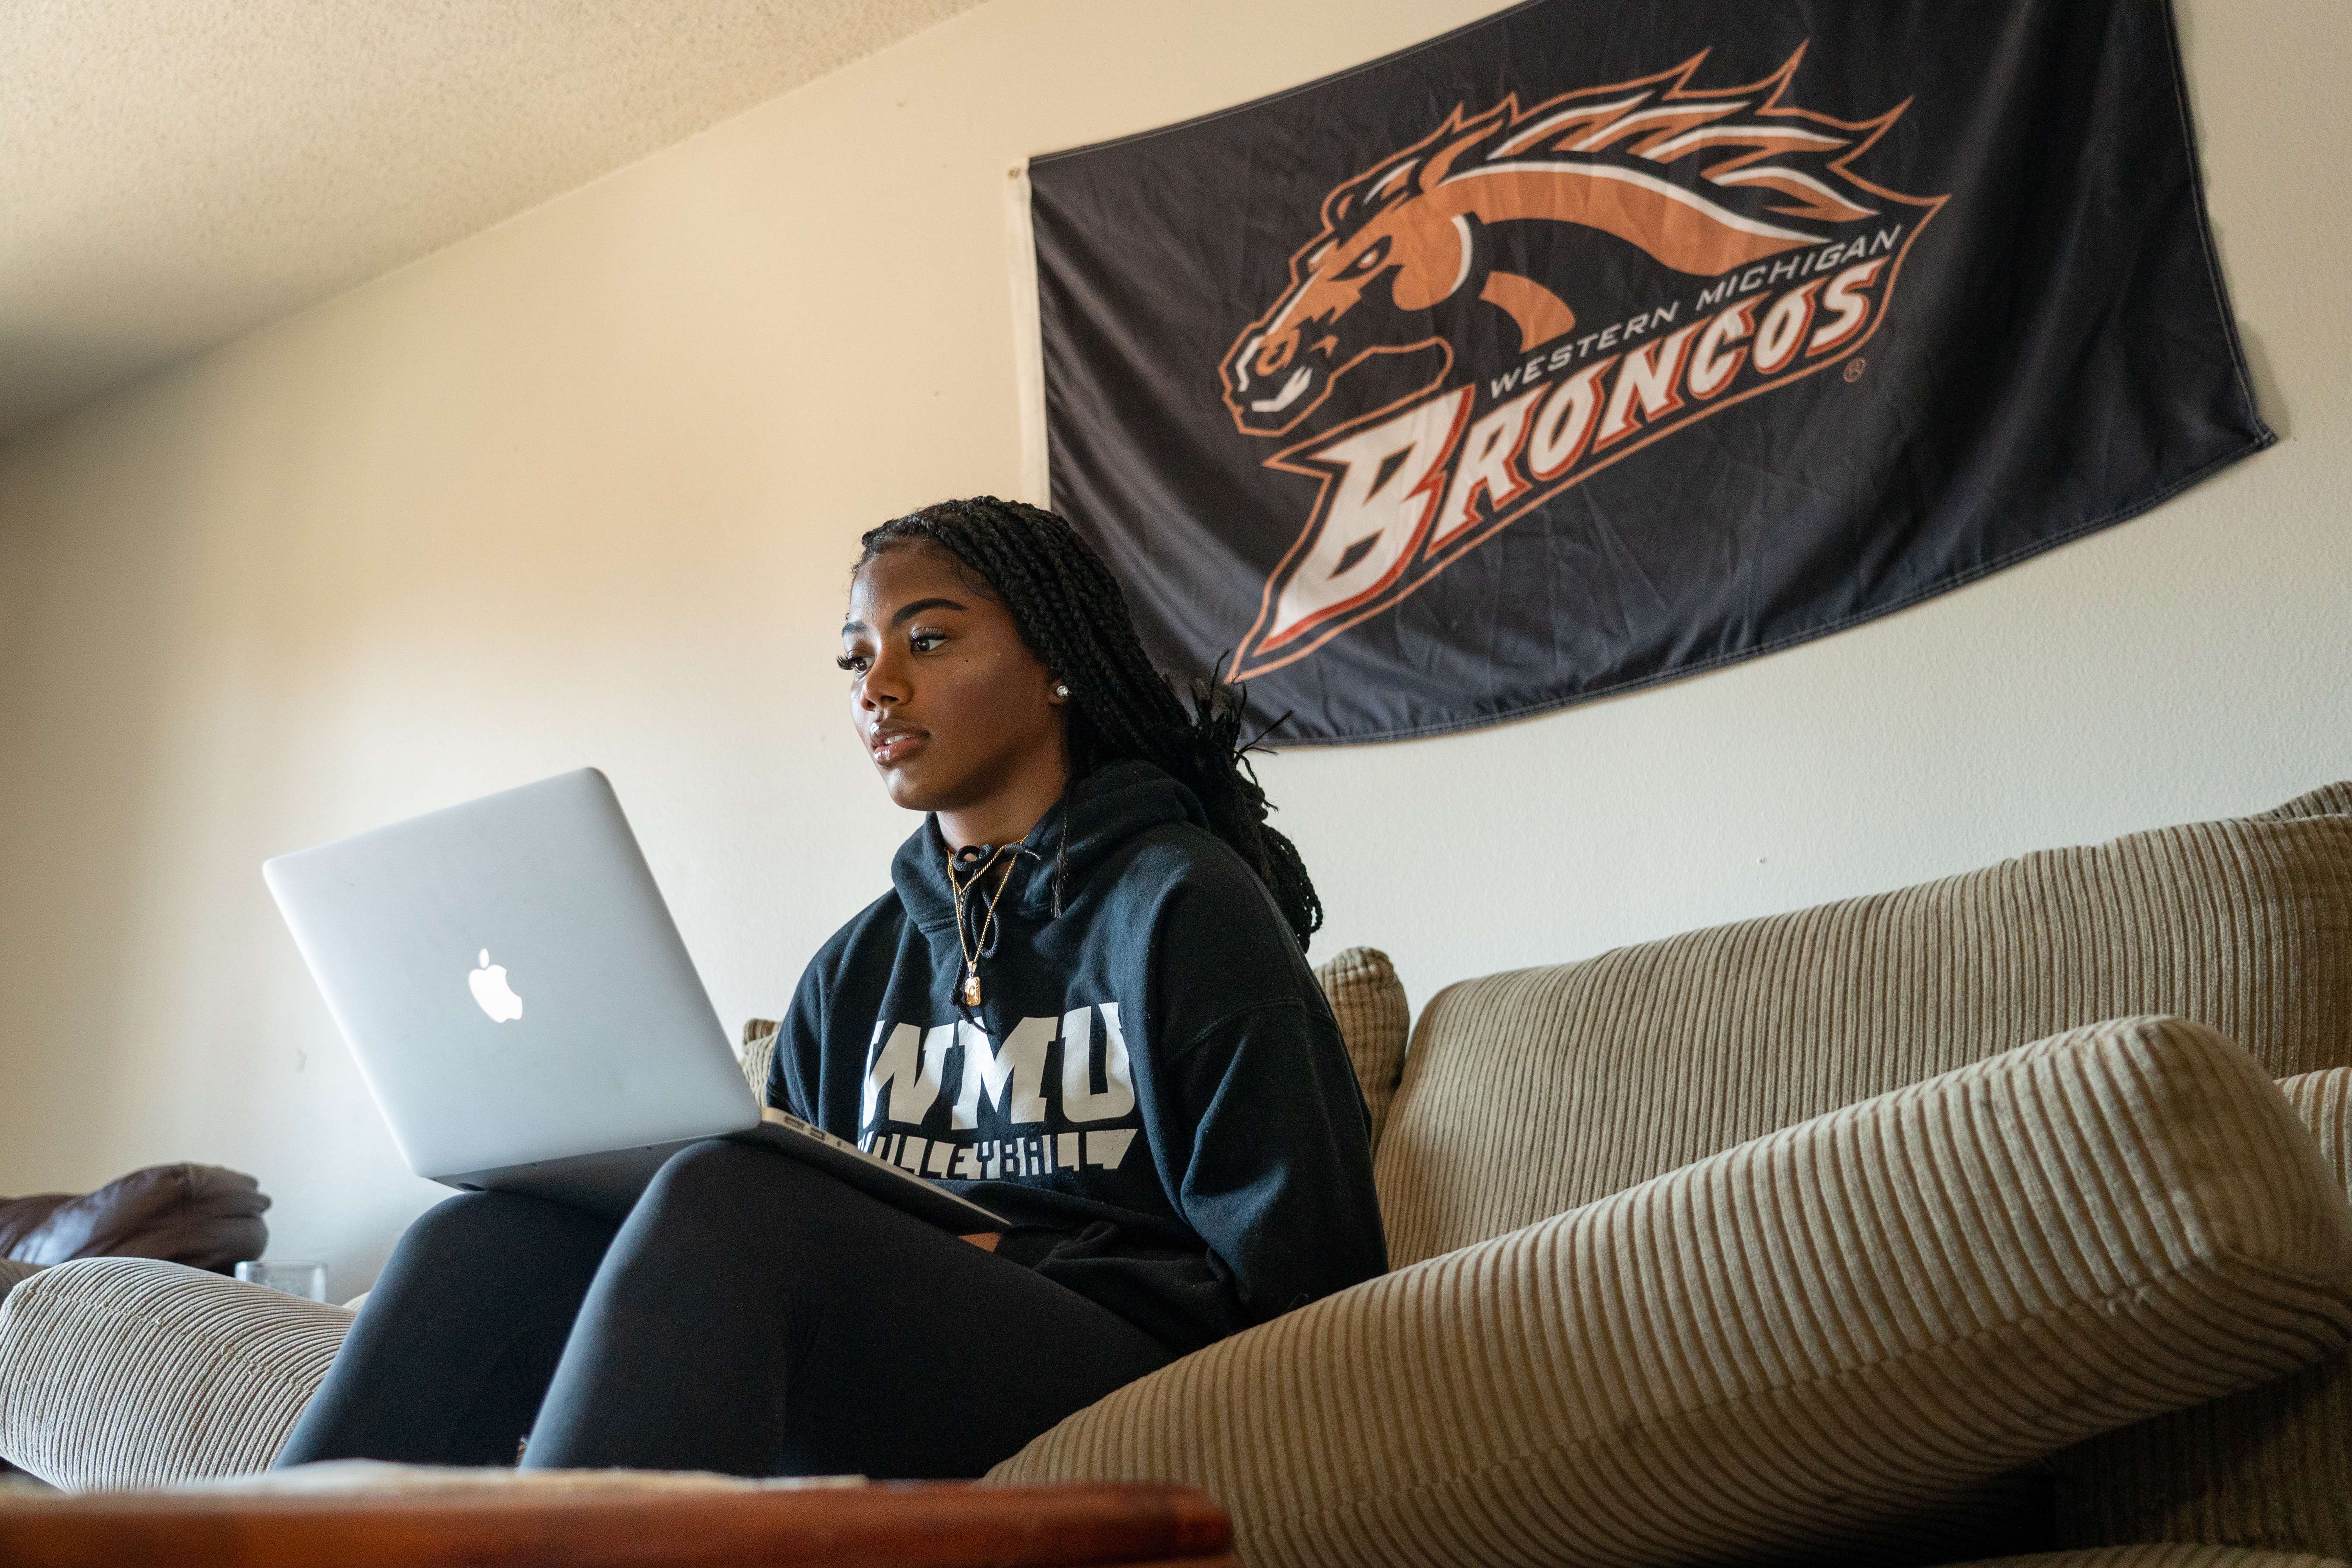 A student on her laptop sitting on the couch with a WMU Broncos sign hanging on the wall.